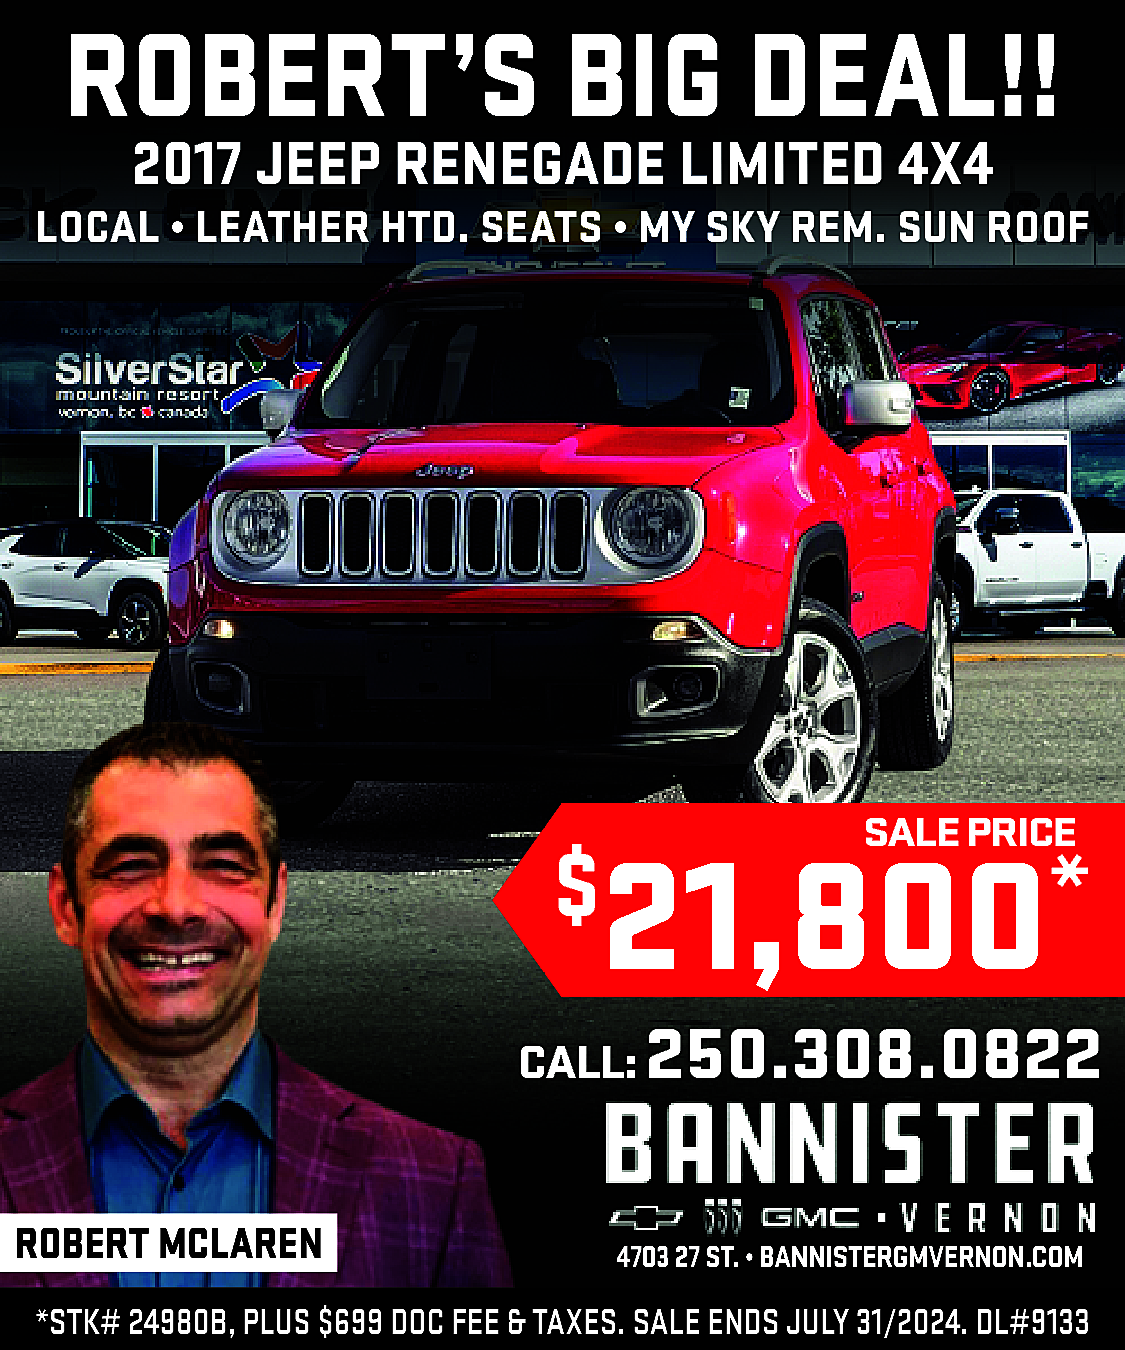 ROBERT’S BIG DEAL!! <br>2017 JEEP  ROBERT’S BIG DEAL!!  2017 JEEP RENEGADE LIMITED 4X4    LOCAL • LEATHER HTD. SEATS • MY SKY REM. SUN ROOF    SALE PRICE    21,800*    $    CALL: 250.308.0822  ROBERT MCLAREN    ·    4703 27 ST. • BANNISTERGMVERNON.COM    *STK# 24980B, PLUS $699 DOC FEE & TAXES. SALE ENDS JULY 31/2024. DL#9133    